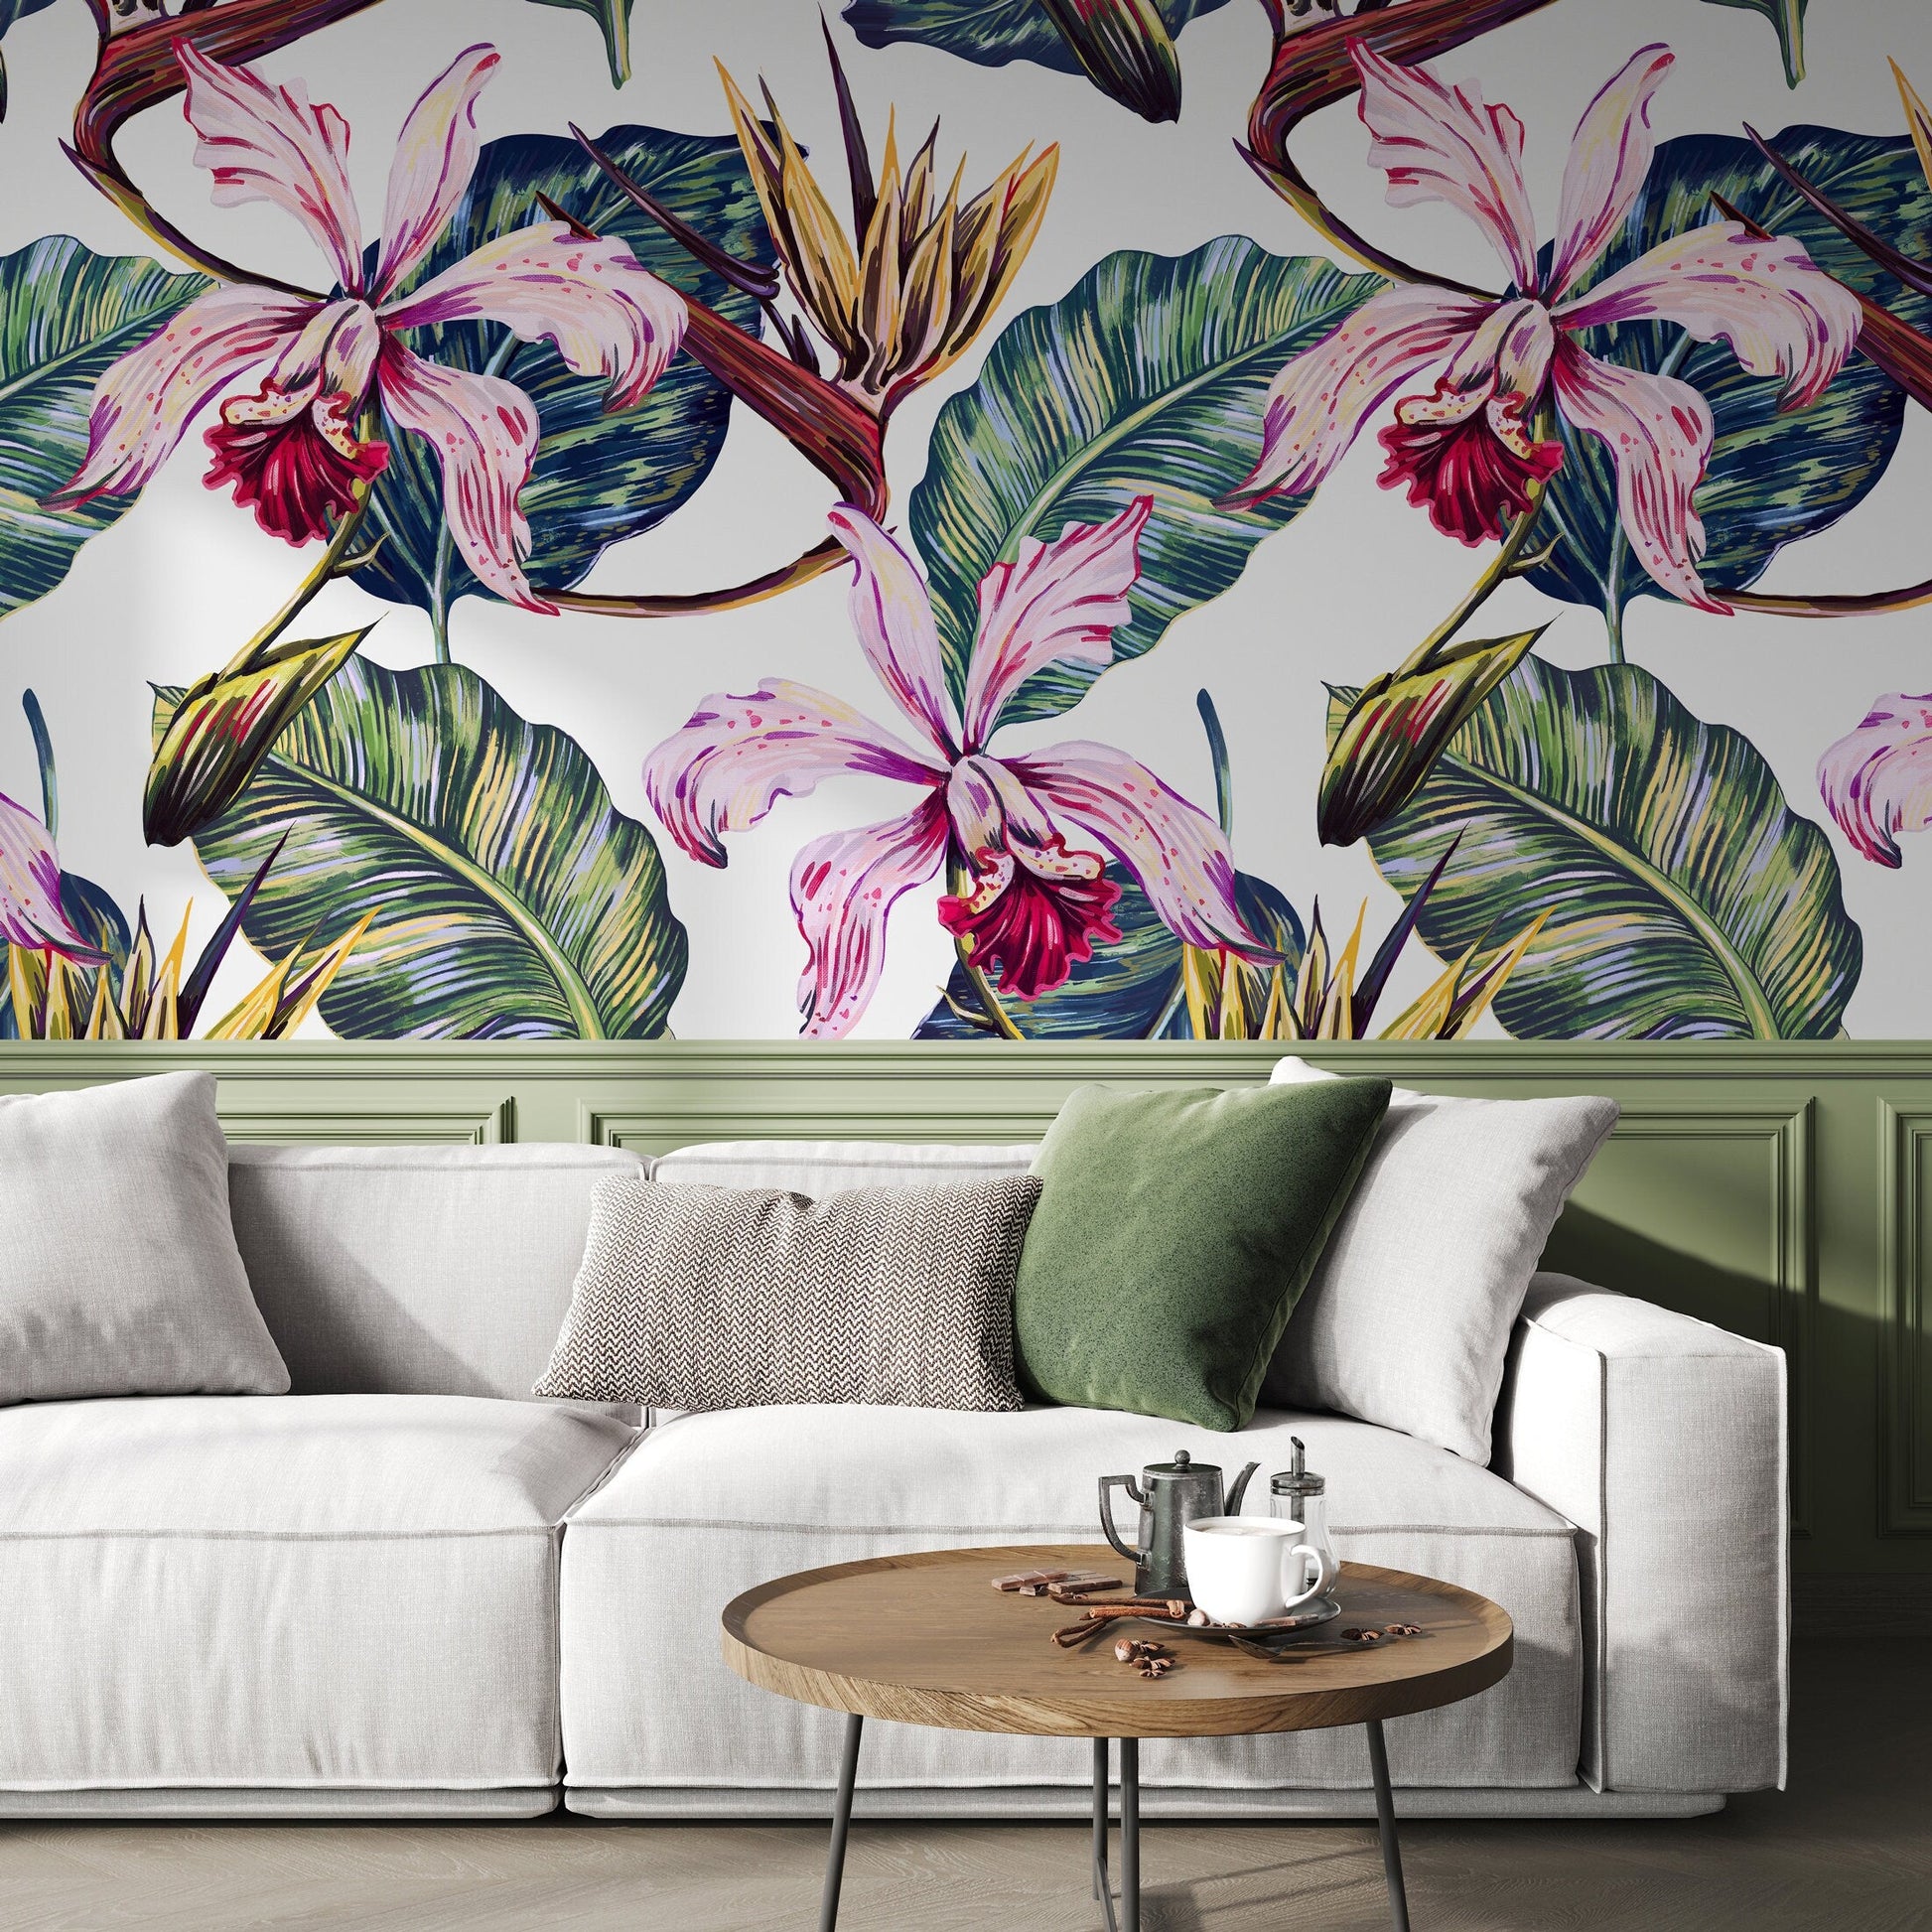 Removable Wallpaper Peel and Stick Wallpaper Wall Paper Wall Mural - Banana Leaf Wallpaper Orchid Wallpaper - A584